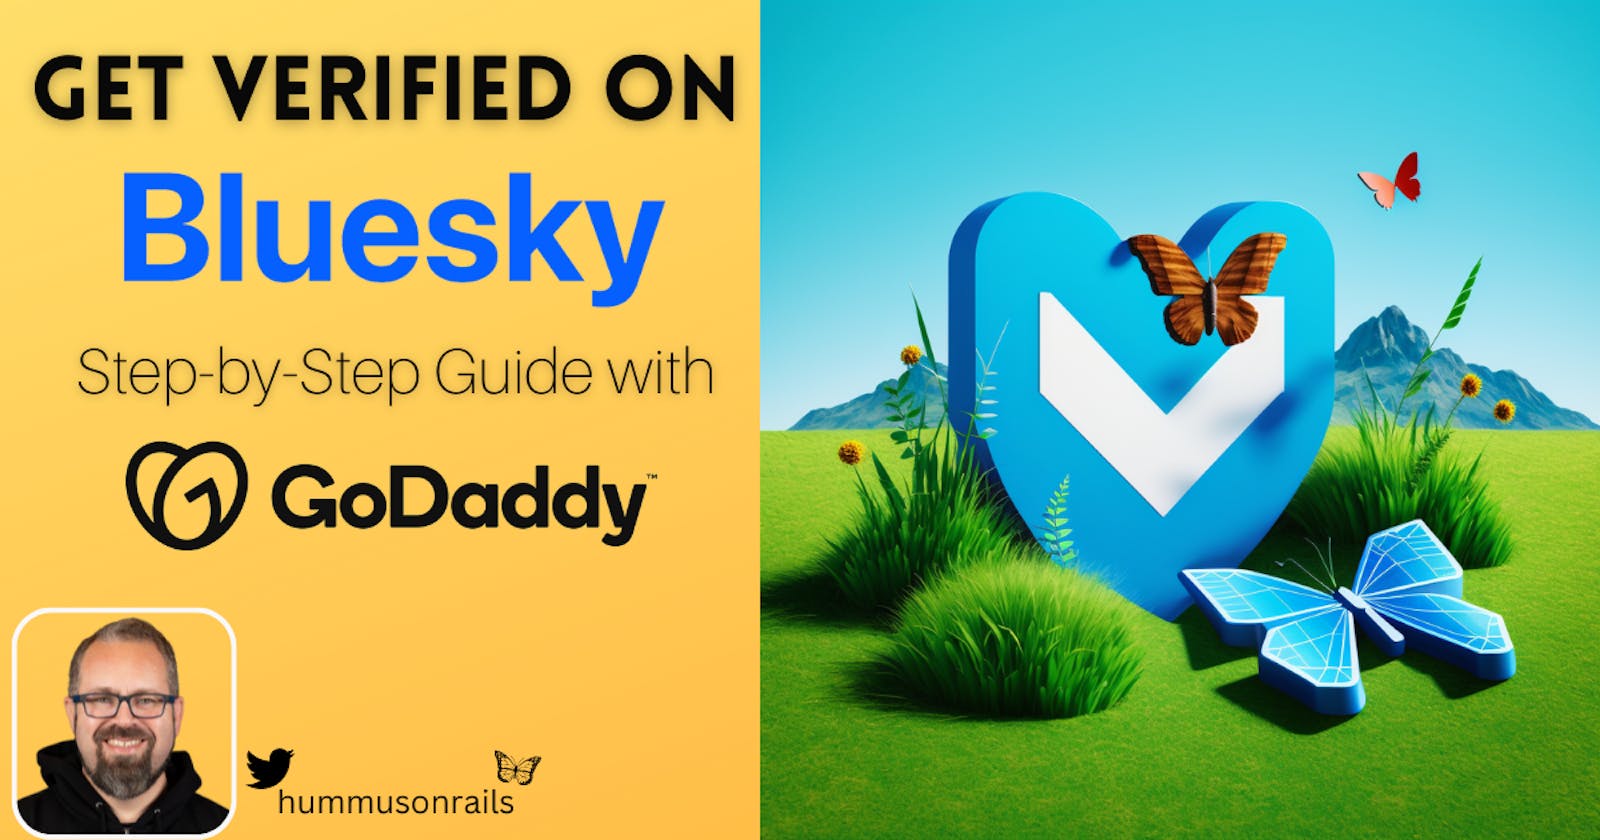 Get Verified on Bluesky Social With Your GoDaddy Domain